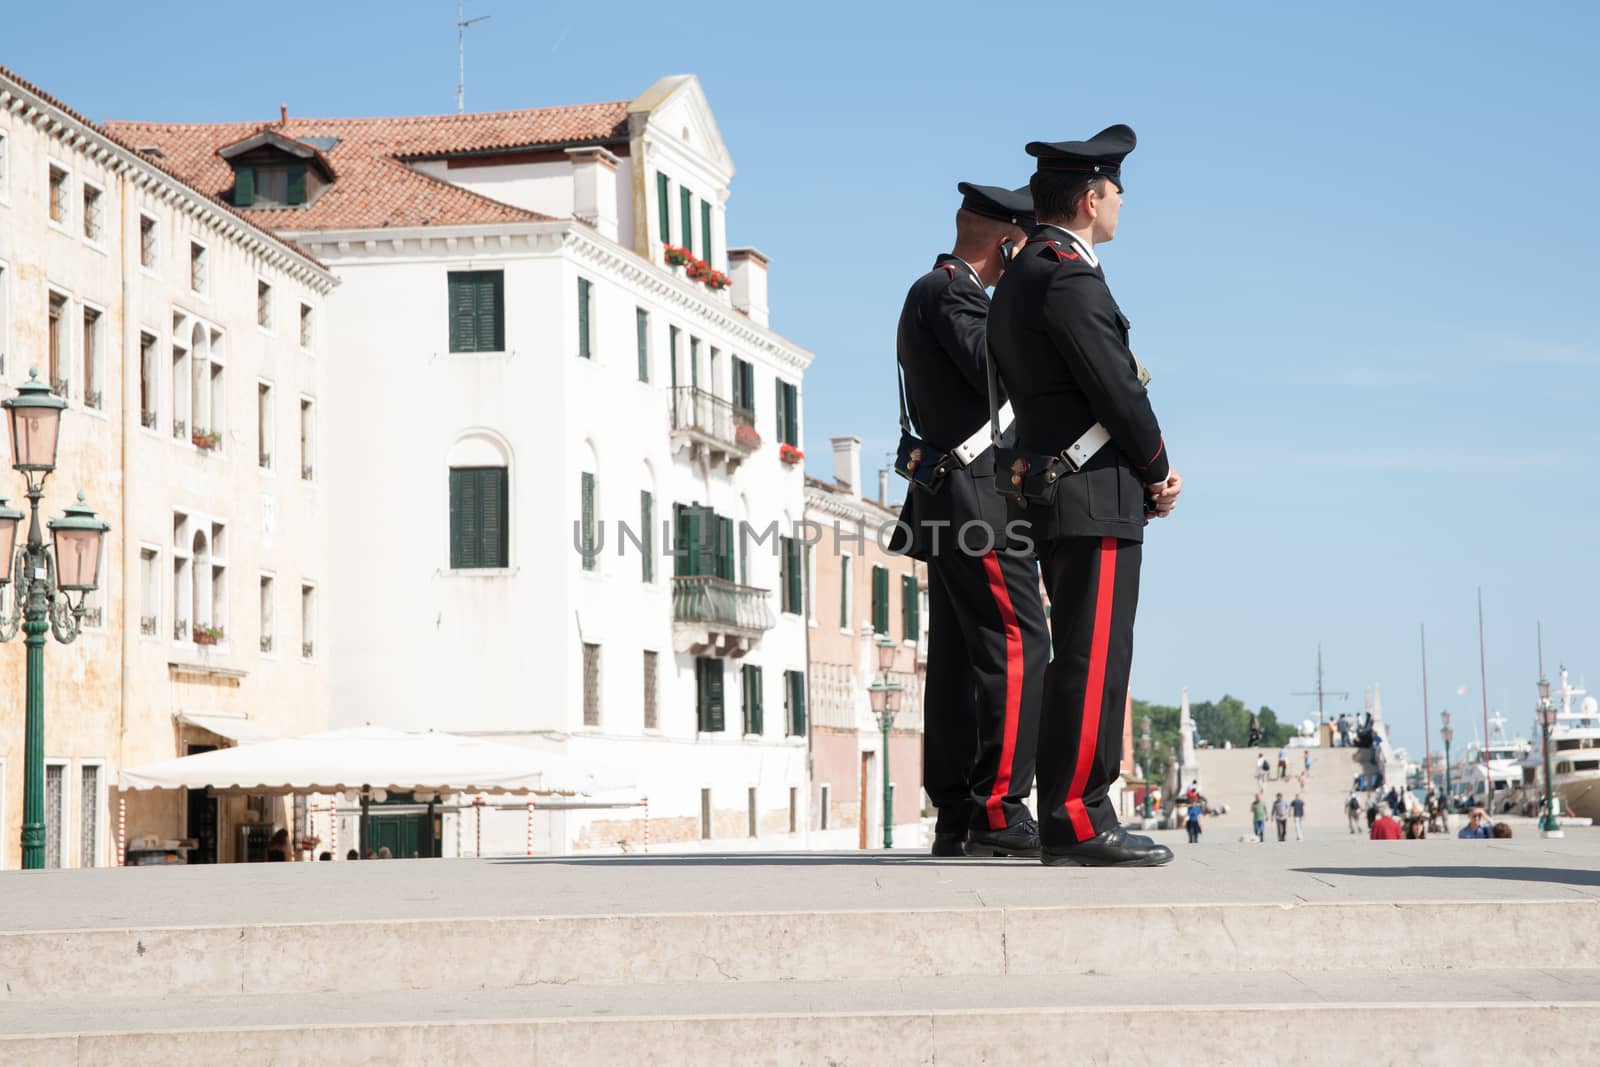 Venice, Italy - May 11, 2011: Two Carabinieri, from one of Italy's two police forces provide travelers with security keeping a watch on activities as tourists pass by near Venice waterfront.